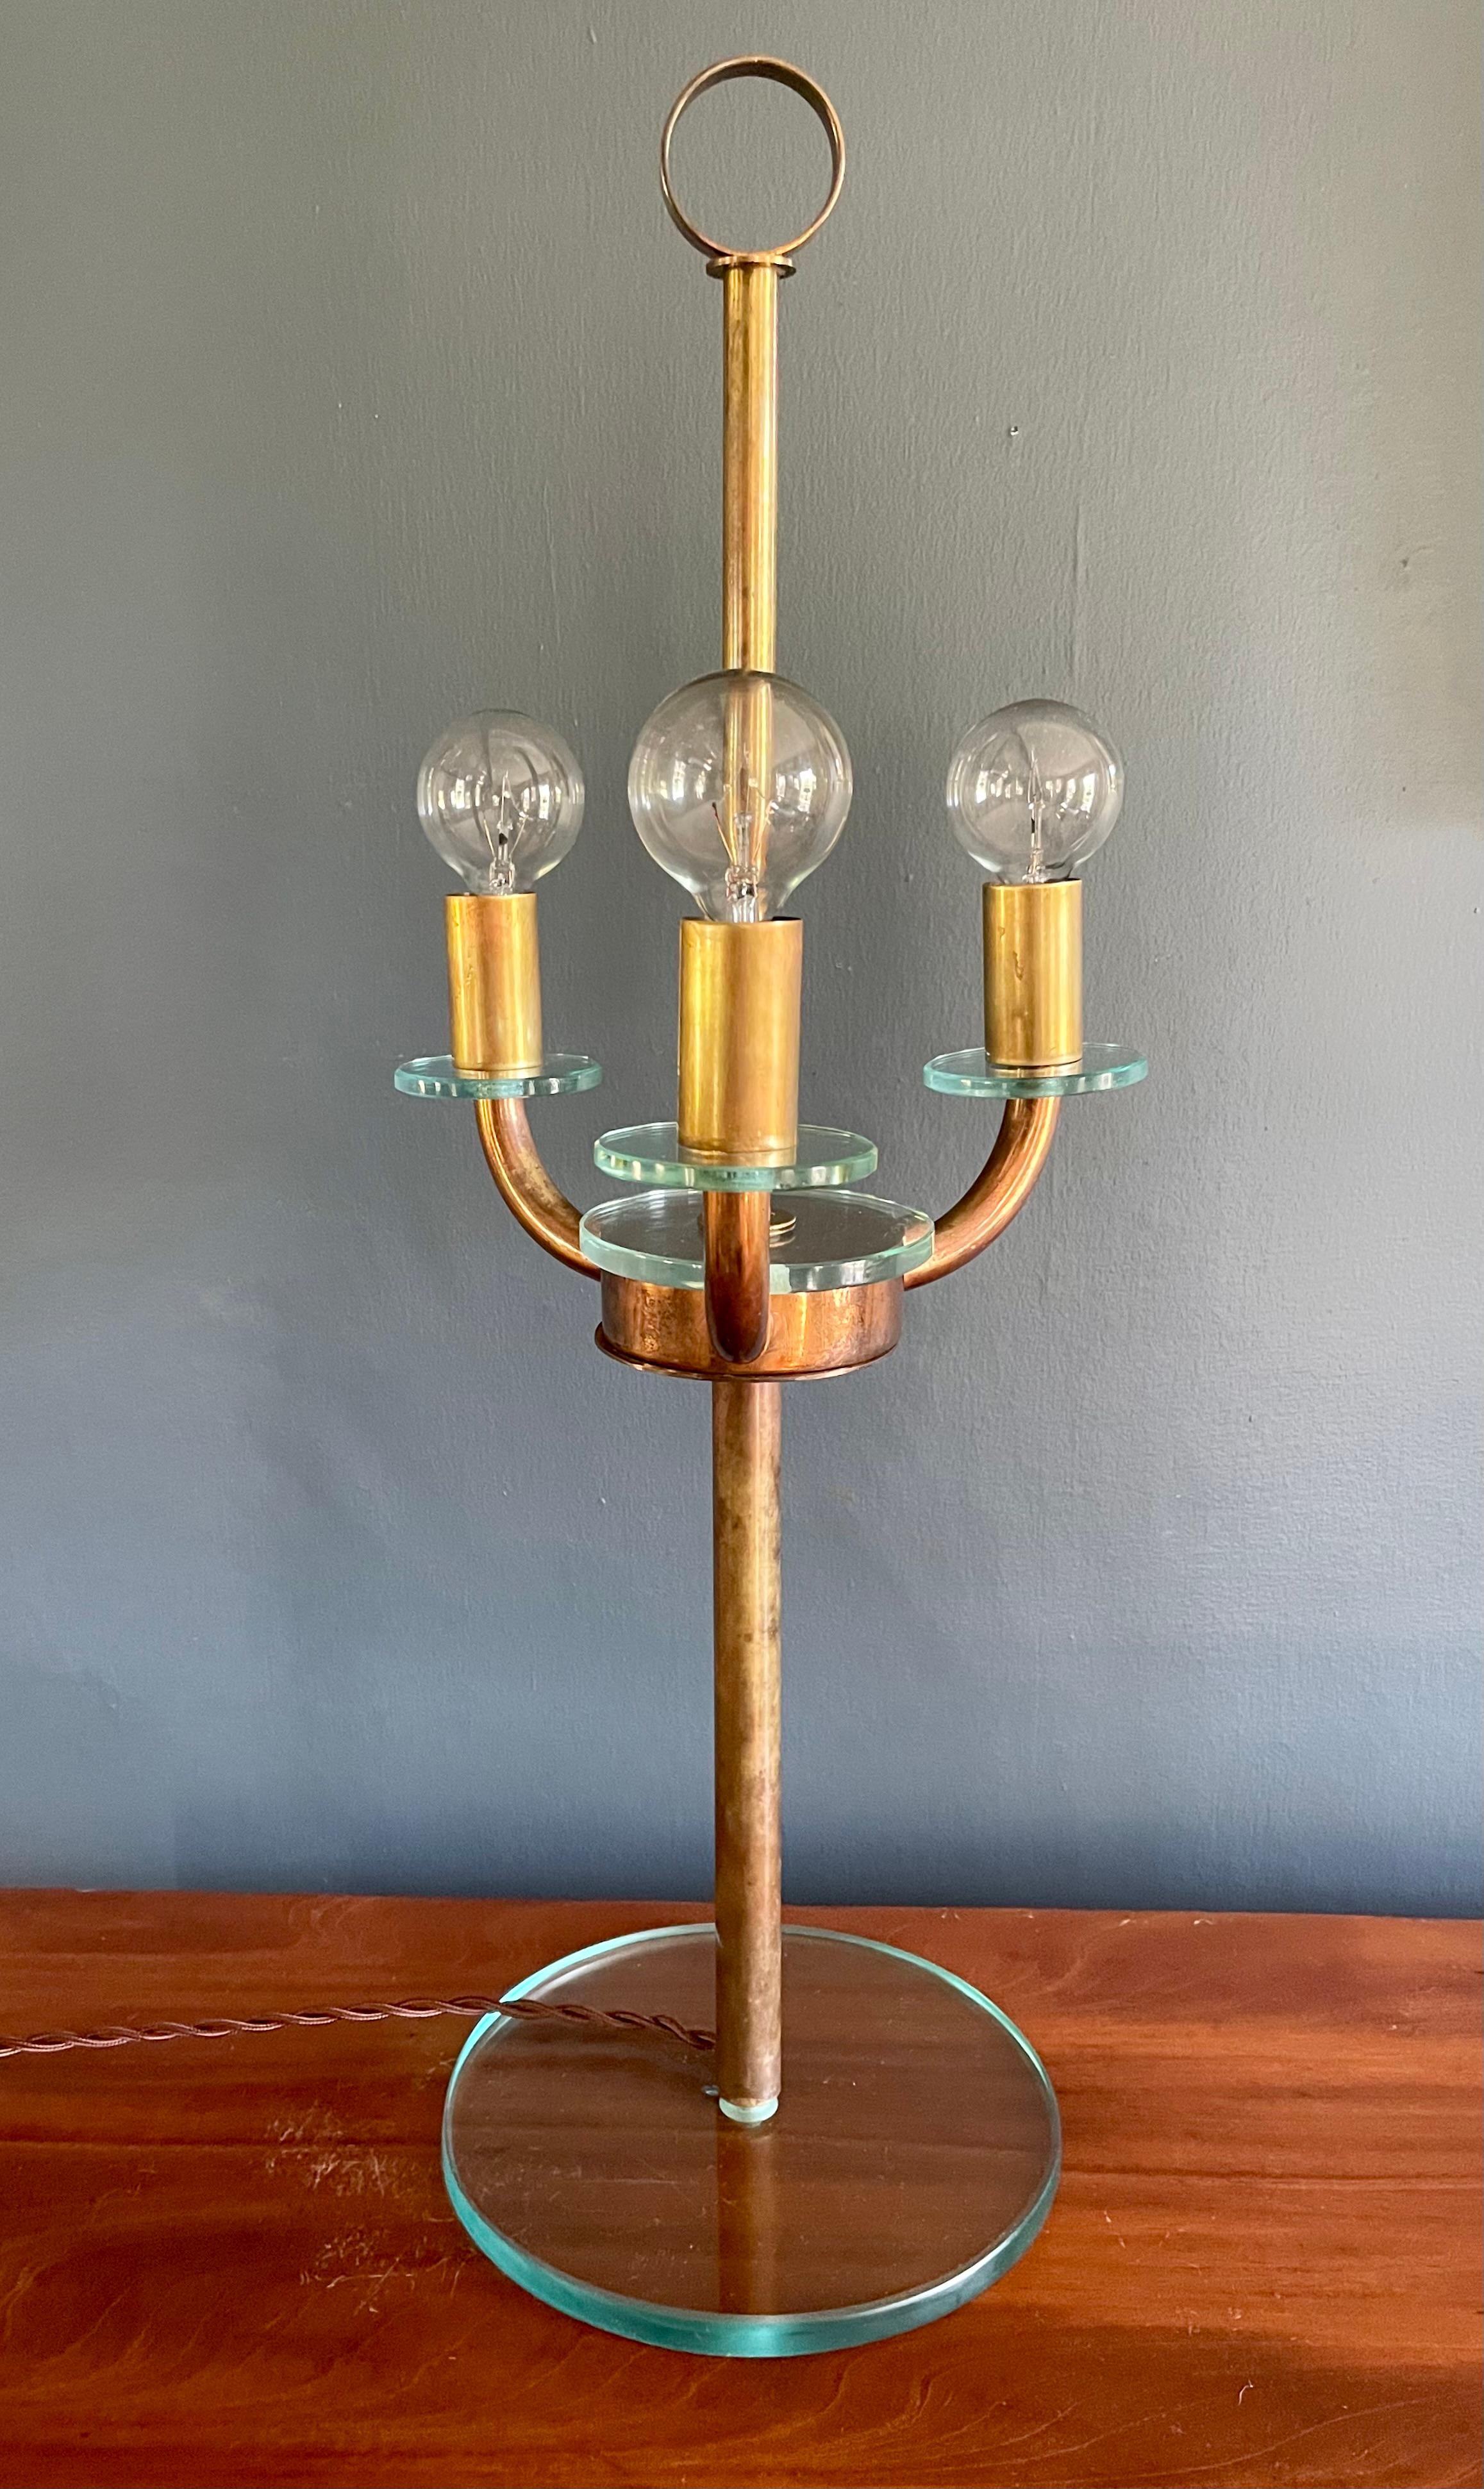 Pietro Chiesa copper and glass table lamp. Three arm vintage copper tubing and fontana art glass style table lamp with brass ring handle and glass base. Newly electrified with switch on silk twist cord. Italy, 1940's

Dimensions: 23